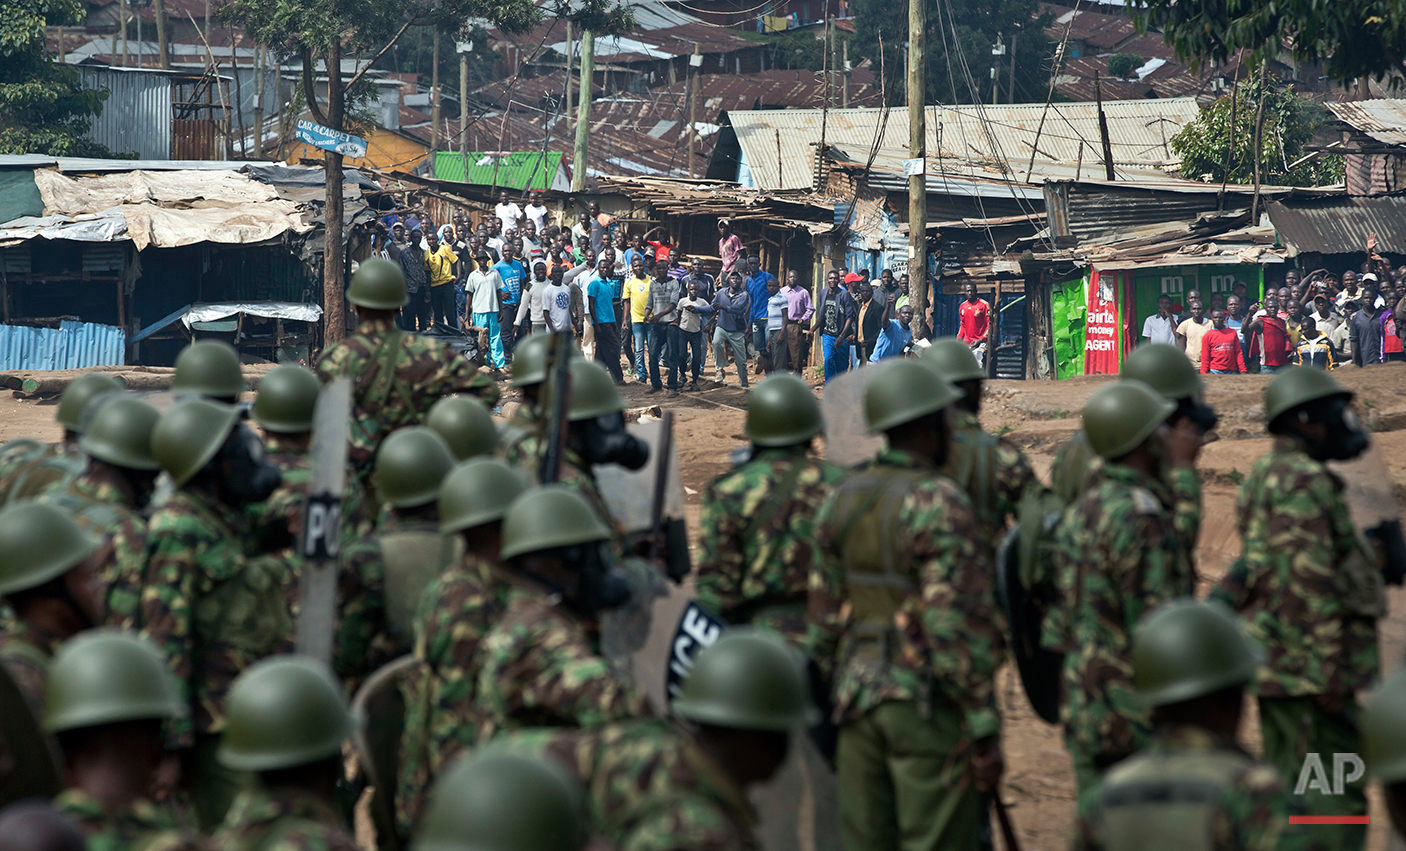  Kenyan police prepare to charge as they engage in running battles between police firing tear gas and protesters throwing rocks, in the Kibera slum of Nairobi, Kenya Monday, May 23, 2016. Kenya's police shot, beat and tear gassed opposition demonstra